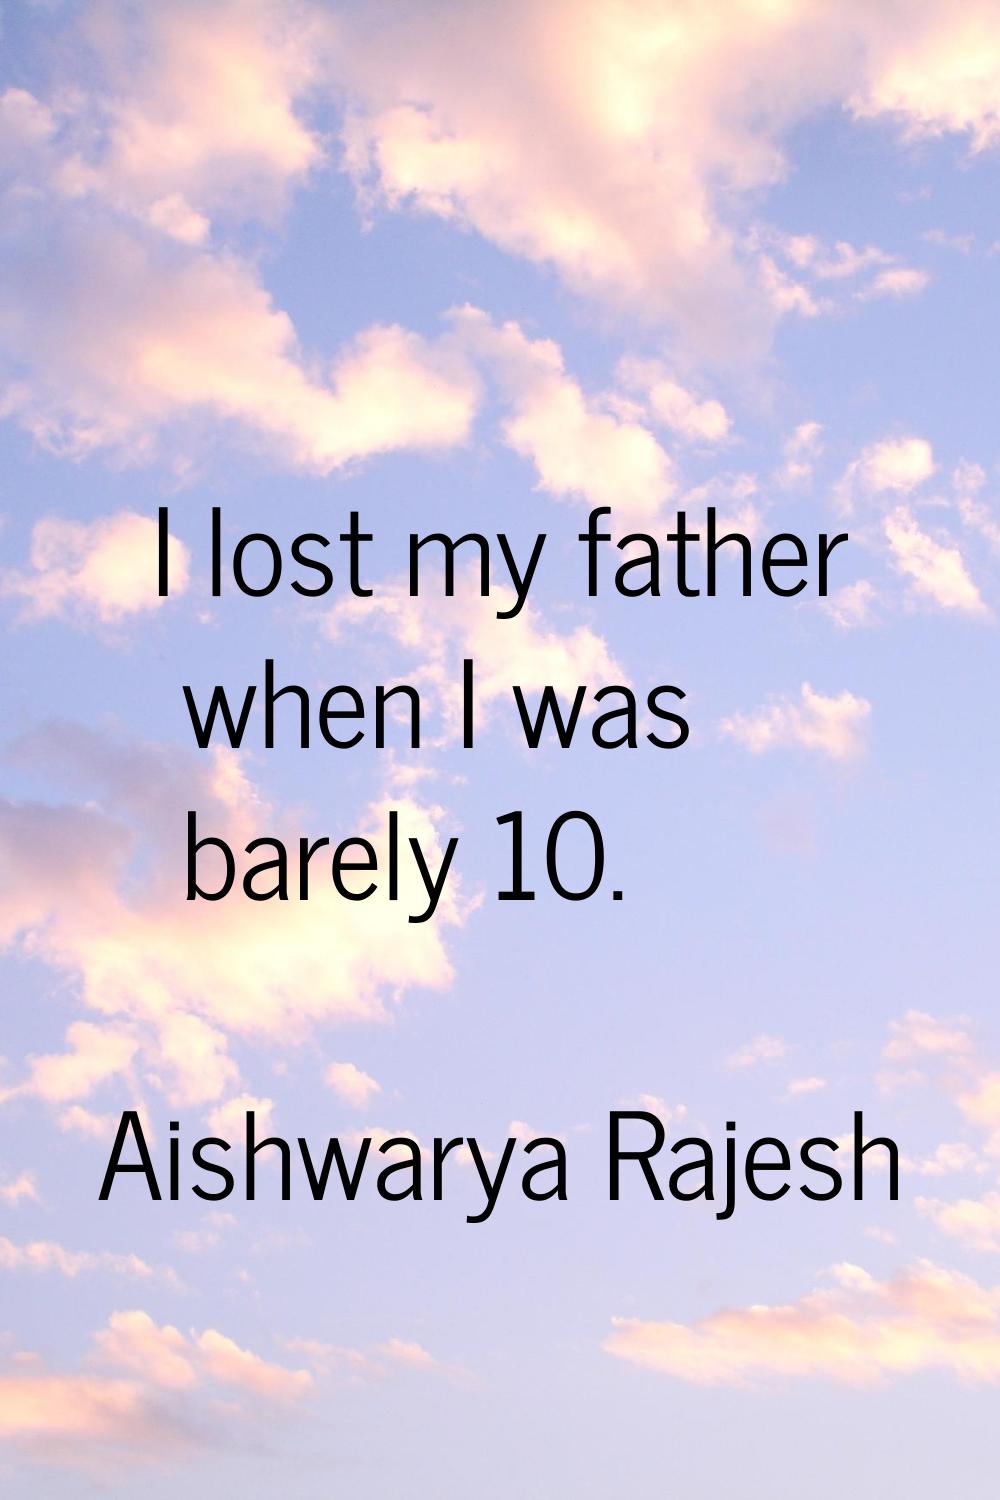 I lost my father when I was barely 10.